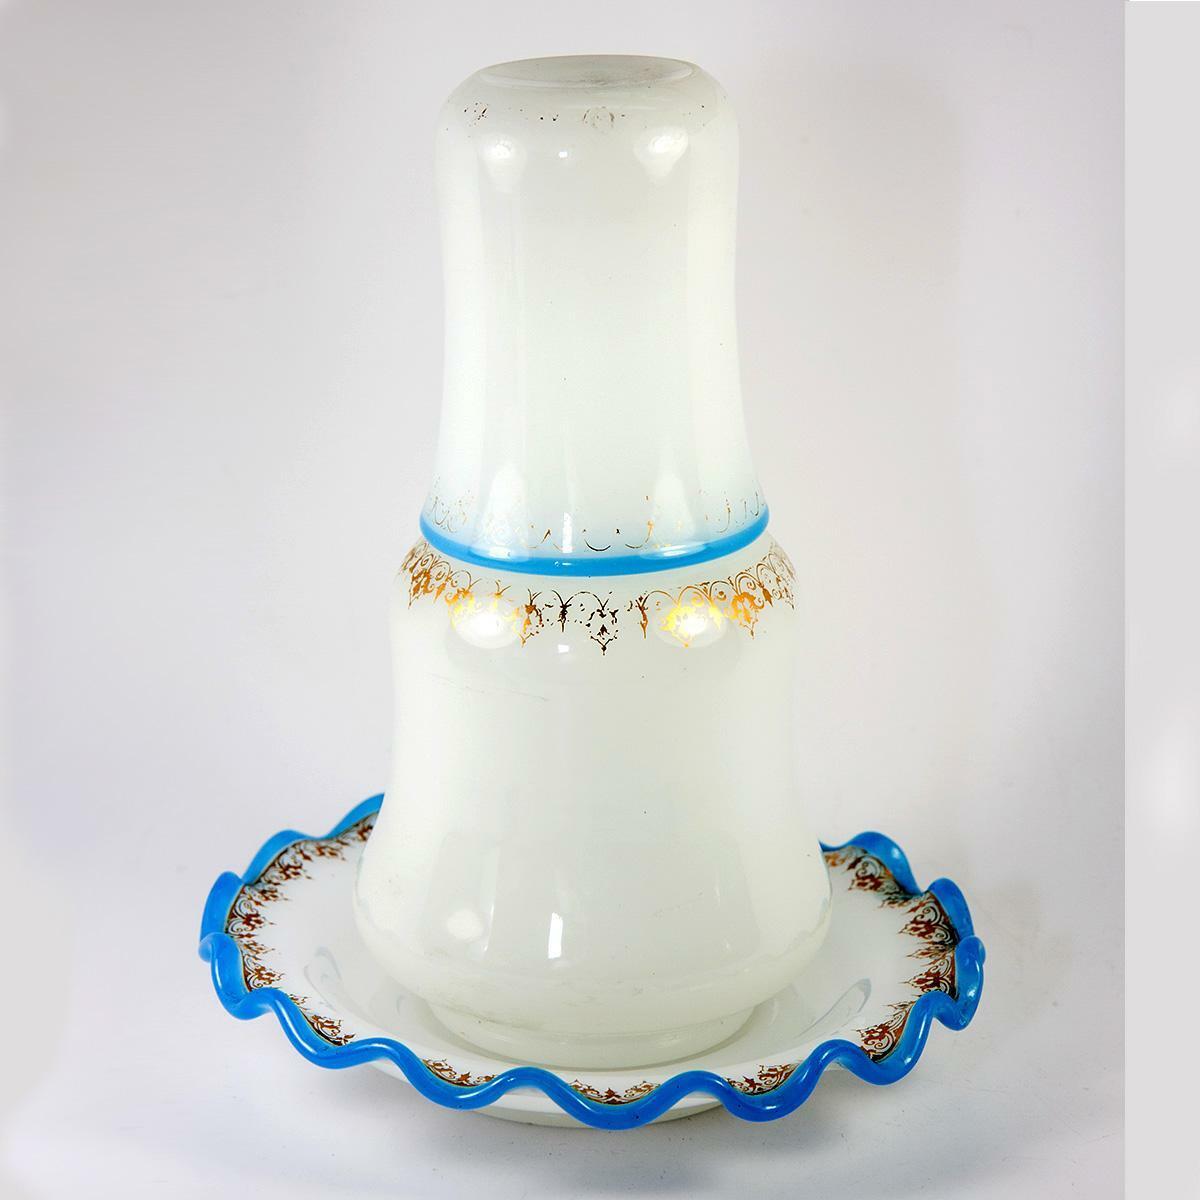 Antique French Opaline Glass Bonne Nuit, Night Water Decanter, Saucer & Cup